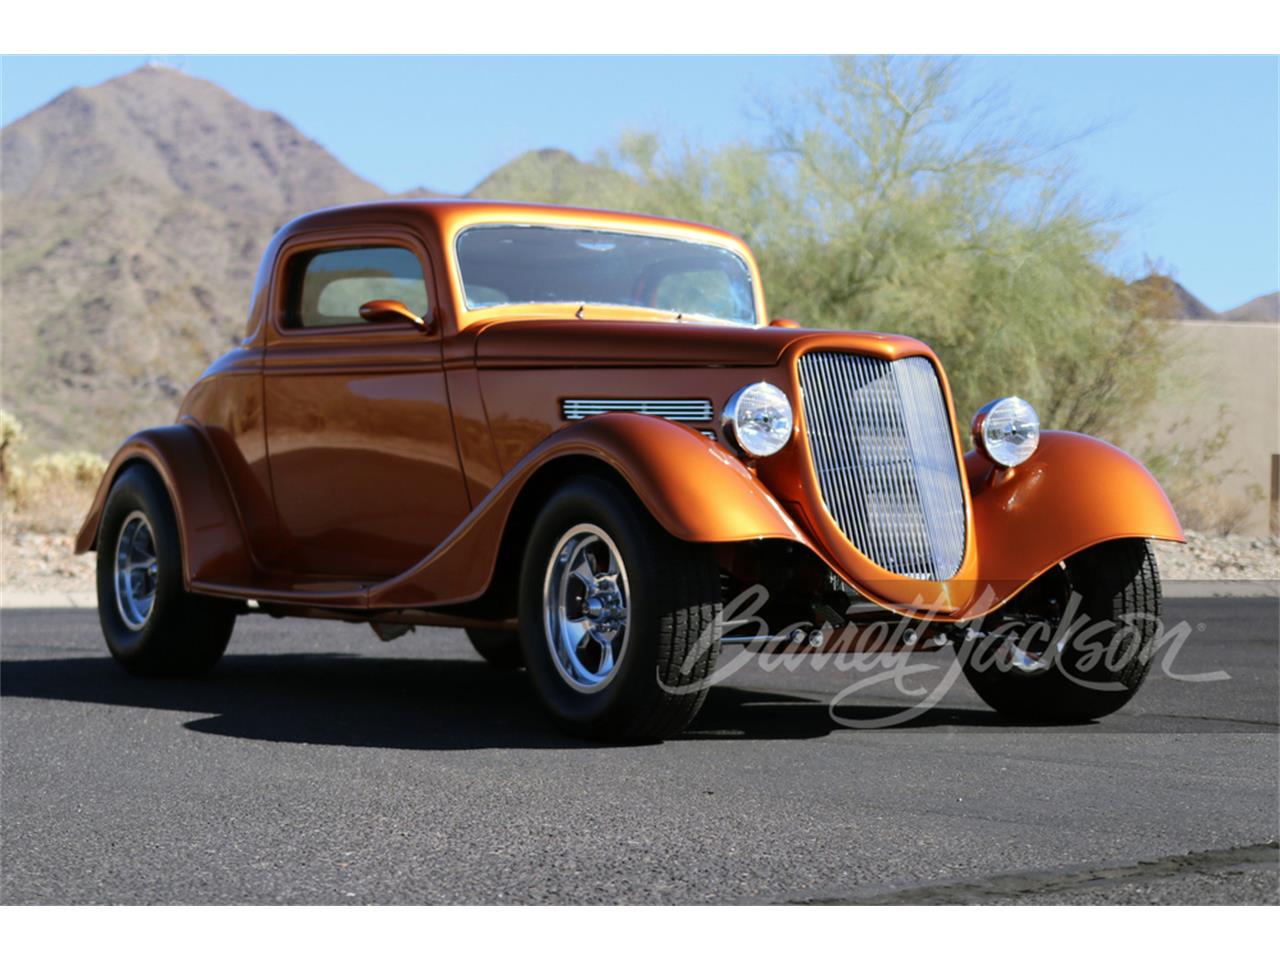 For Sale at Auction: 1934 Ford Custom in Scottsdale, Arizona for sale in Scottsdale, AZ